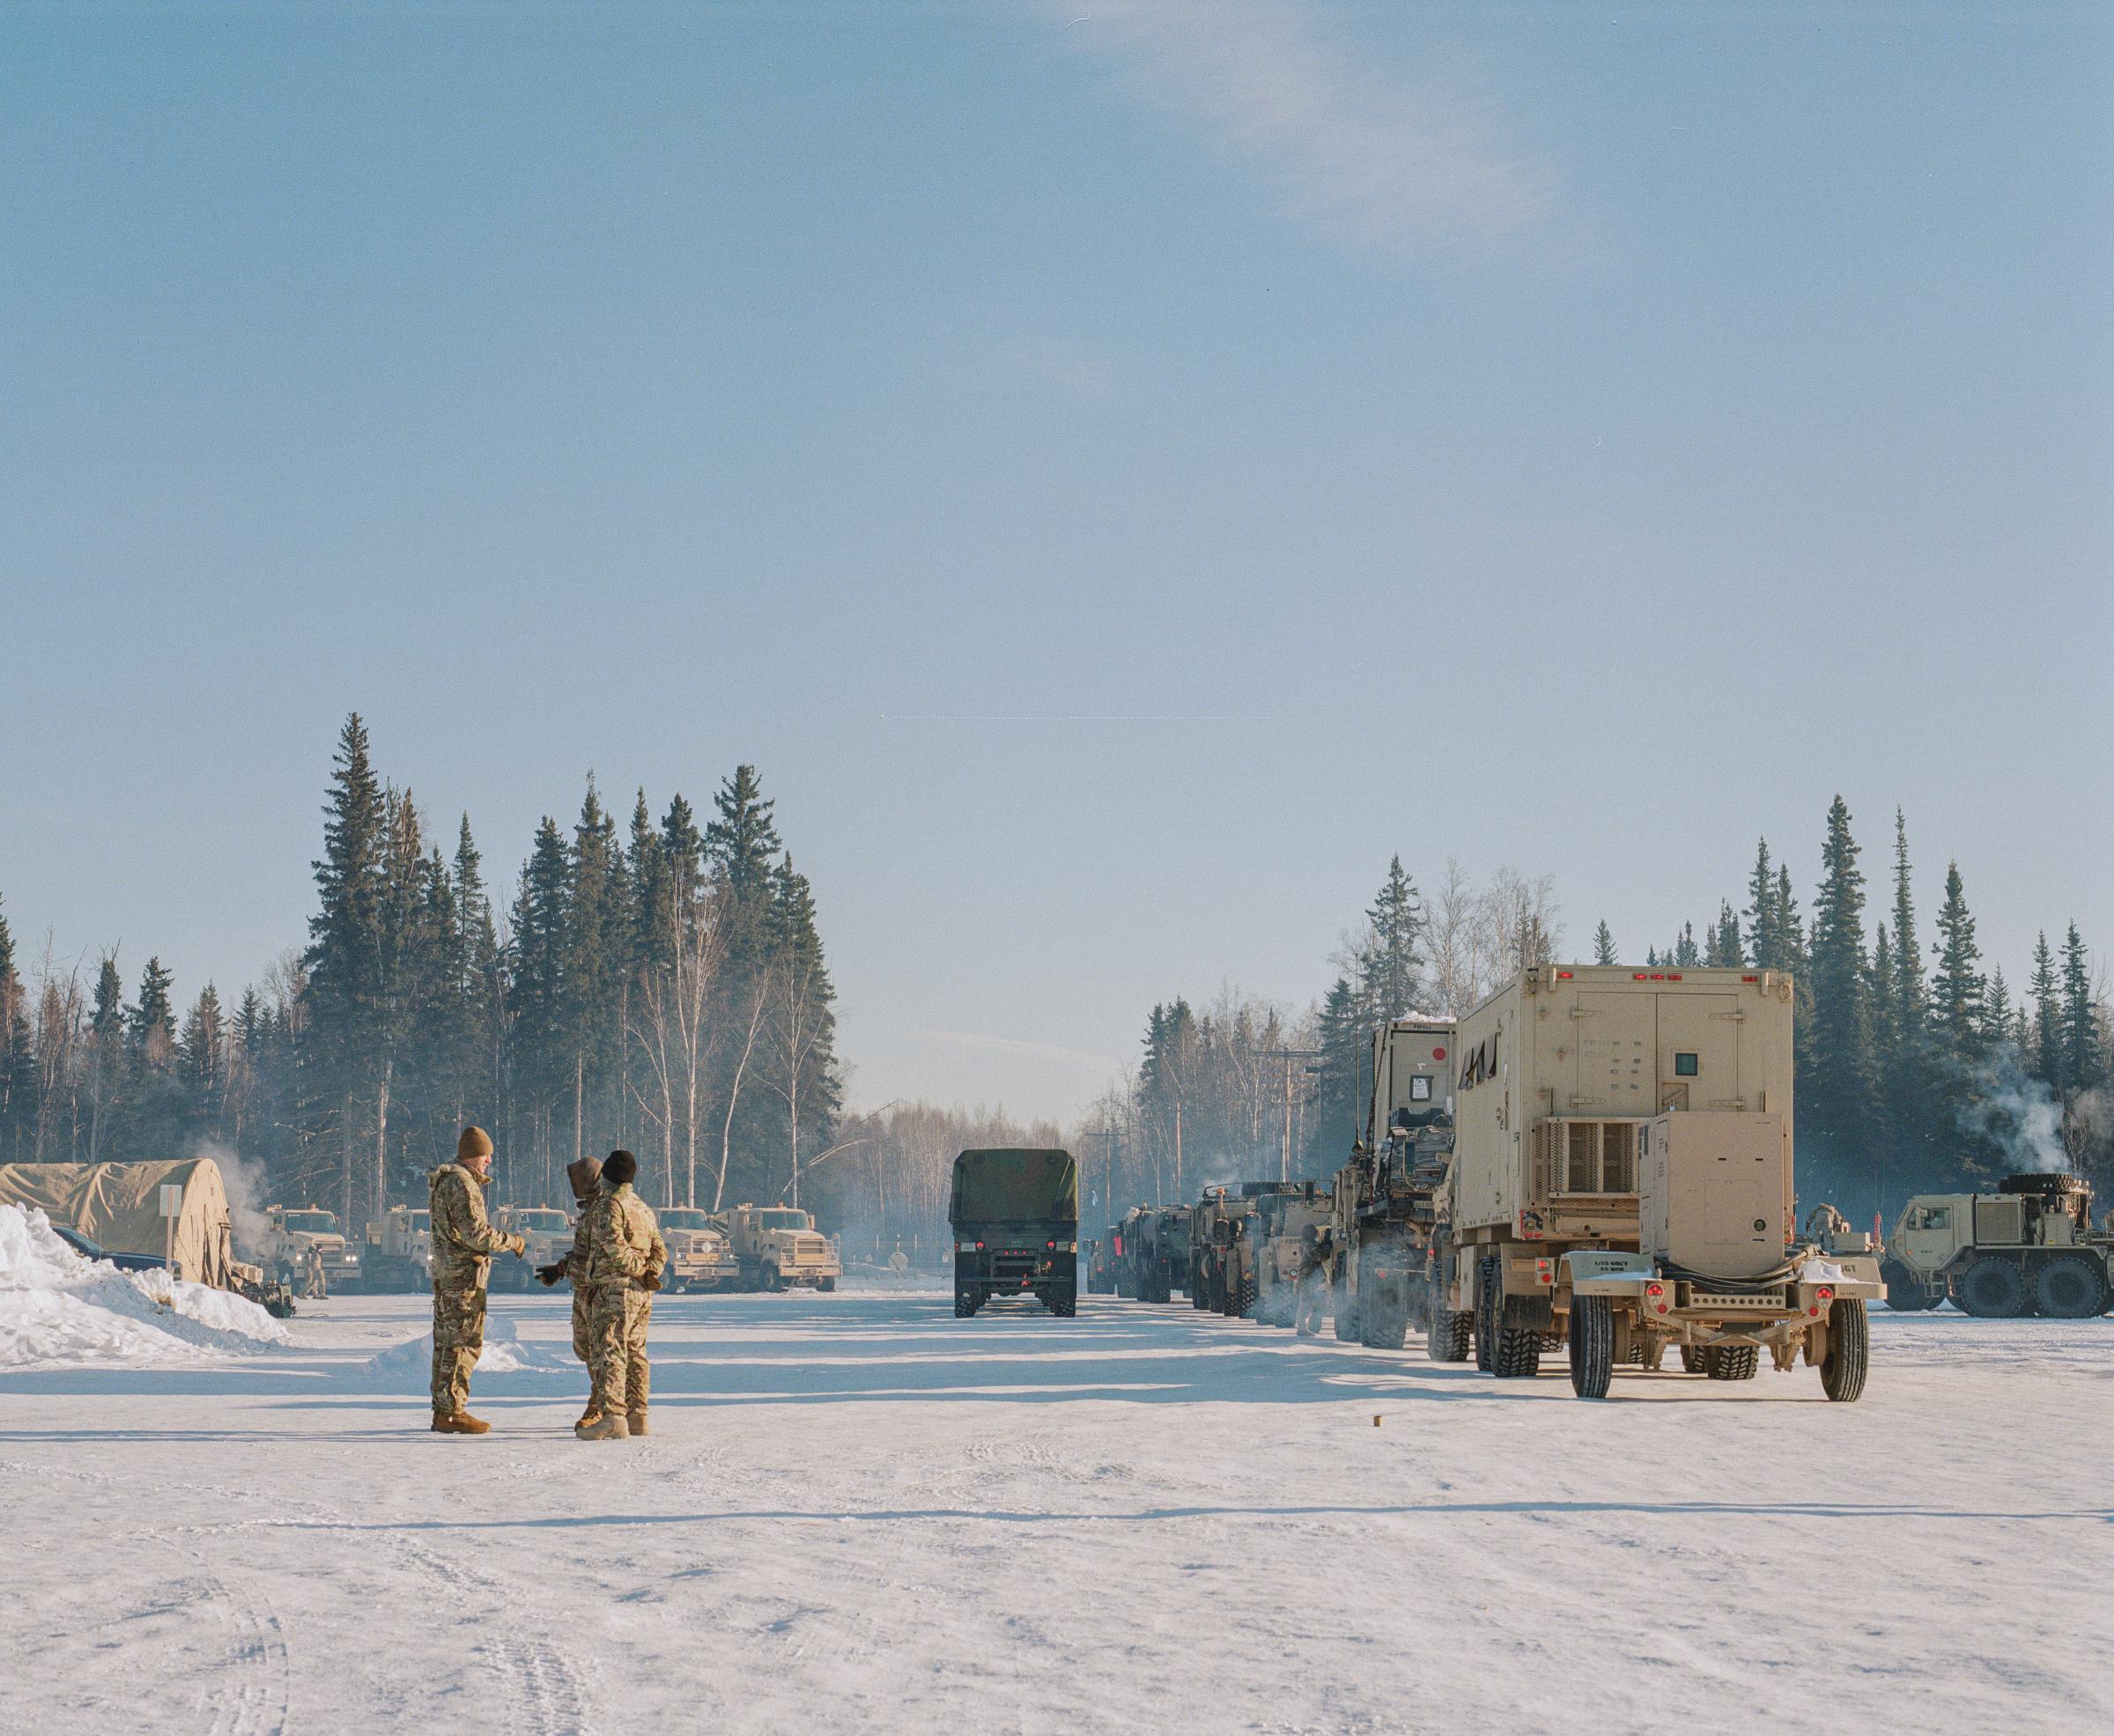 NEW WORK//STORIES - FORT WAINWRIGHT, FAIRBANKS, AK -- Monday, March 14, 2022:...